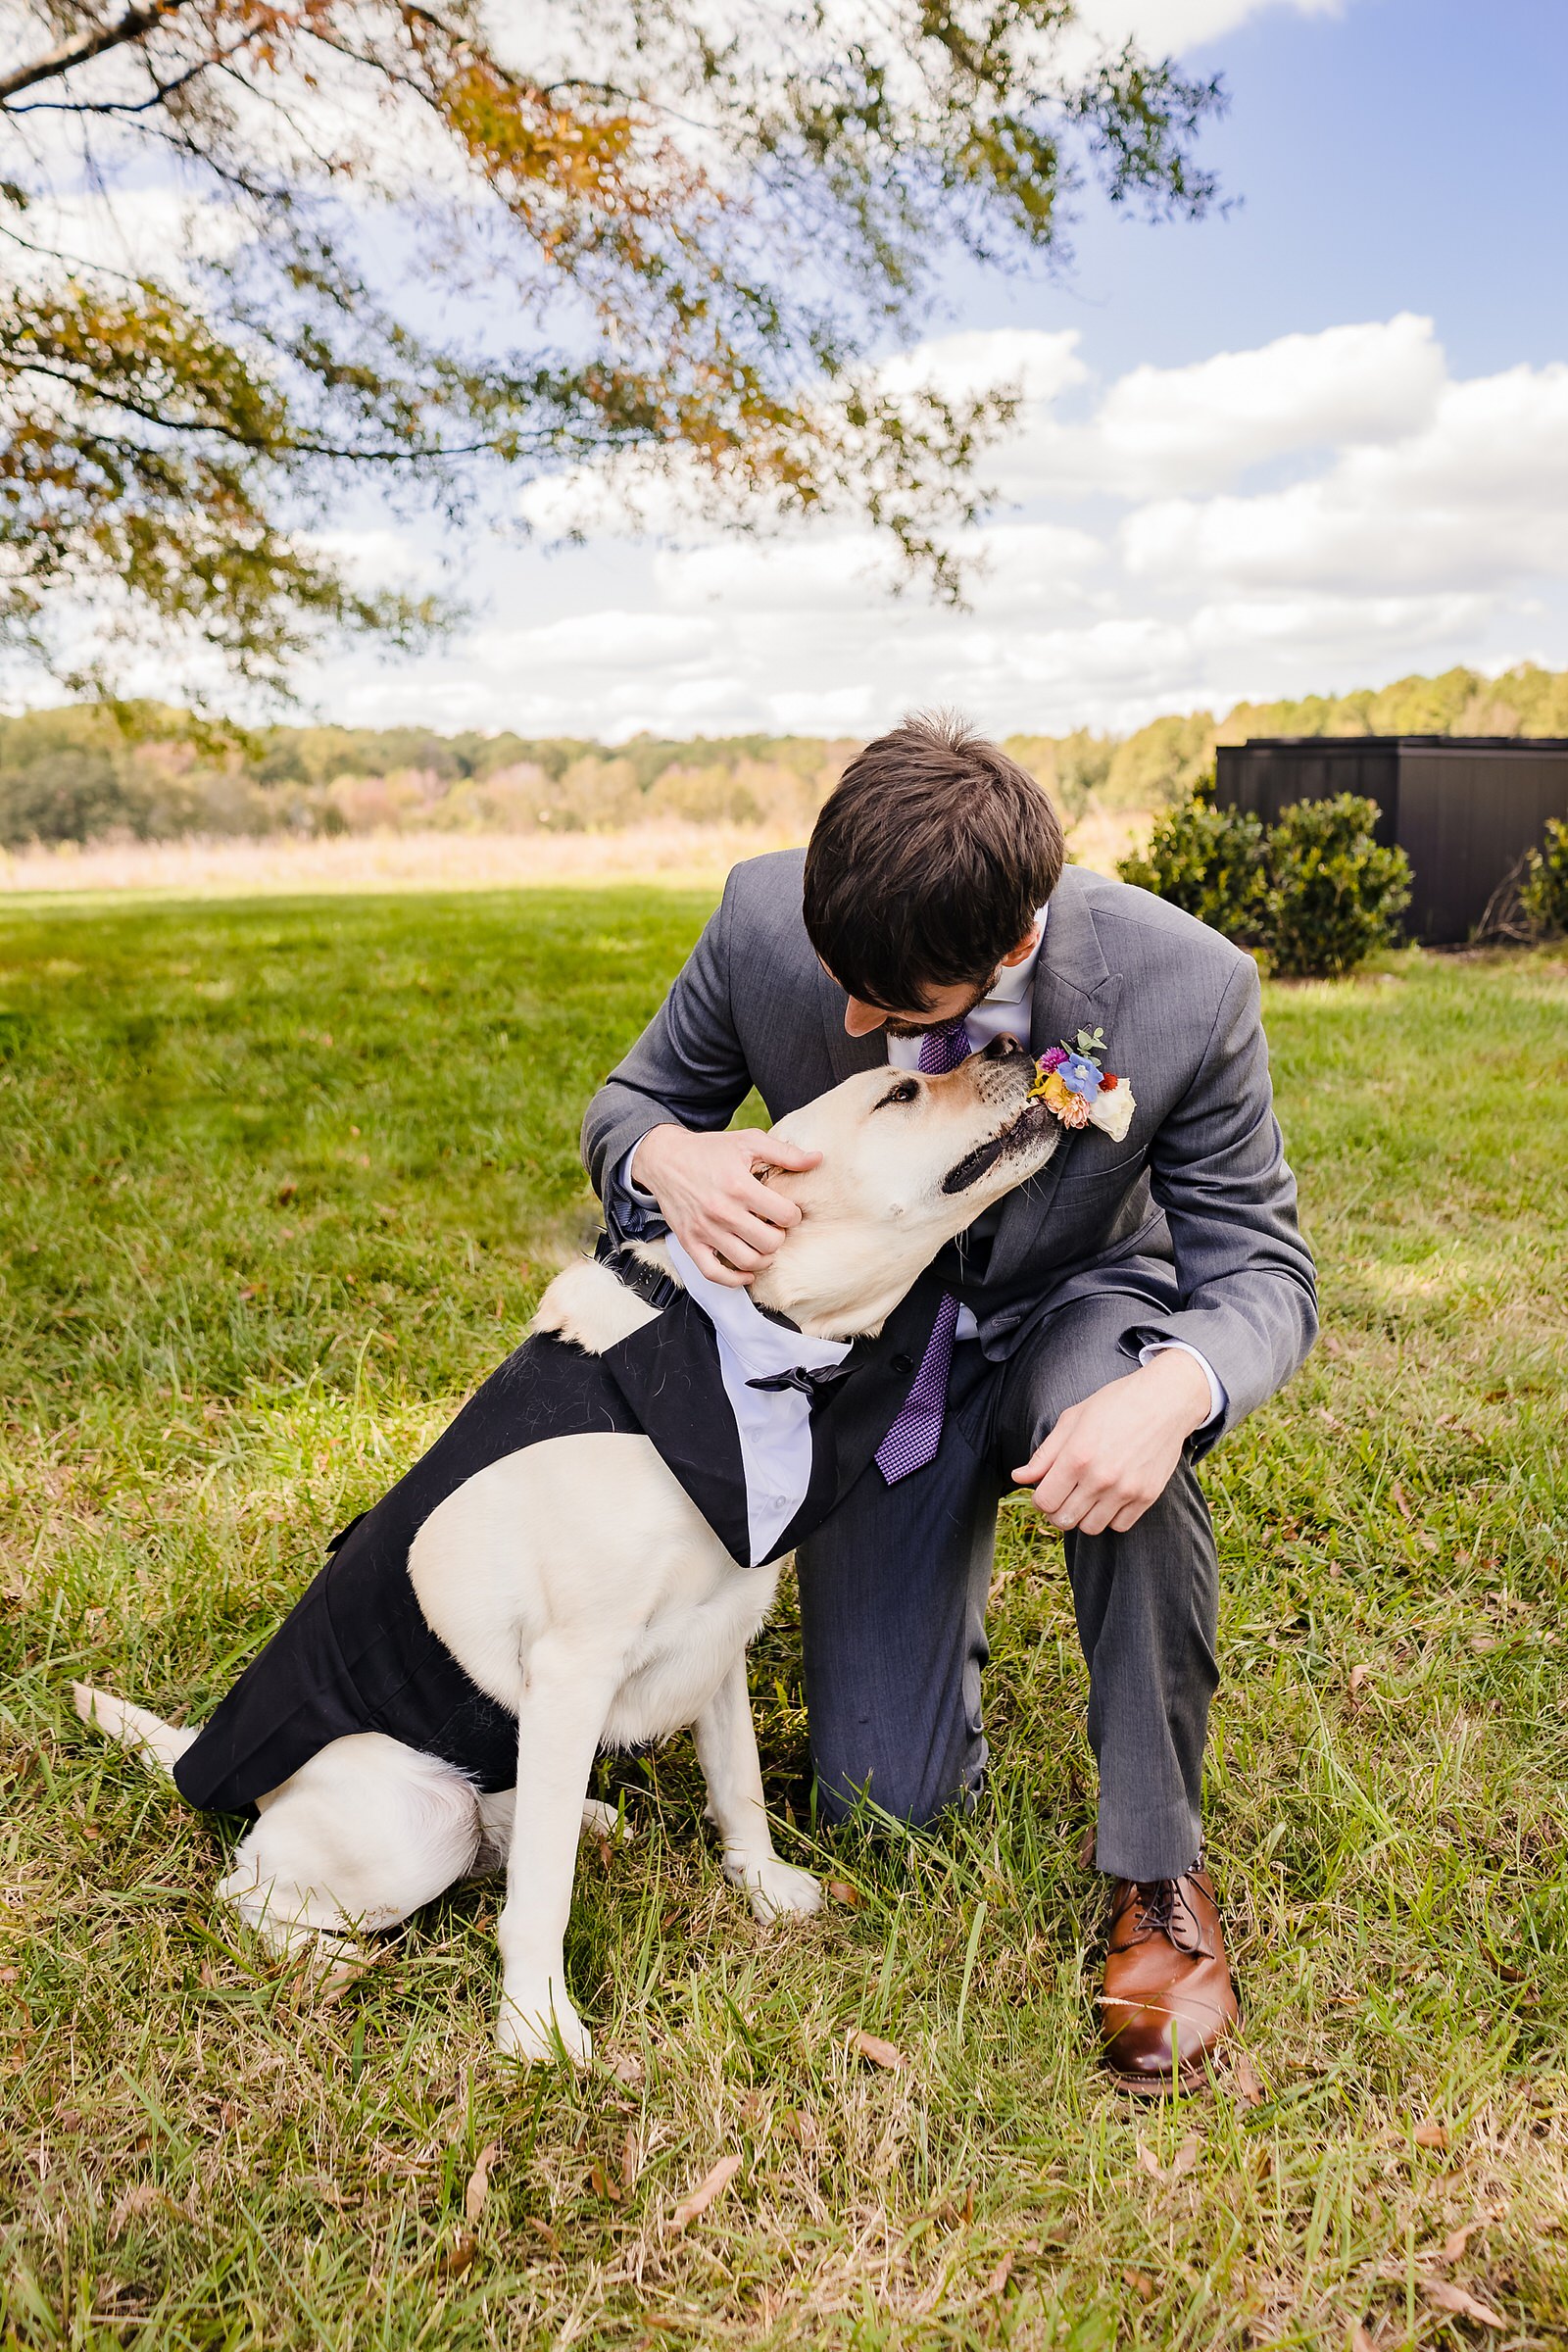 Ring bearer dog tries to eat the groom's boutonniere. 